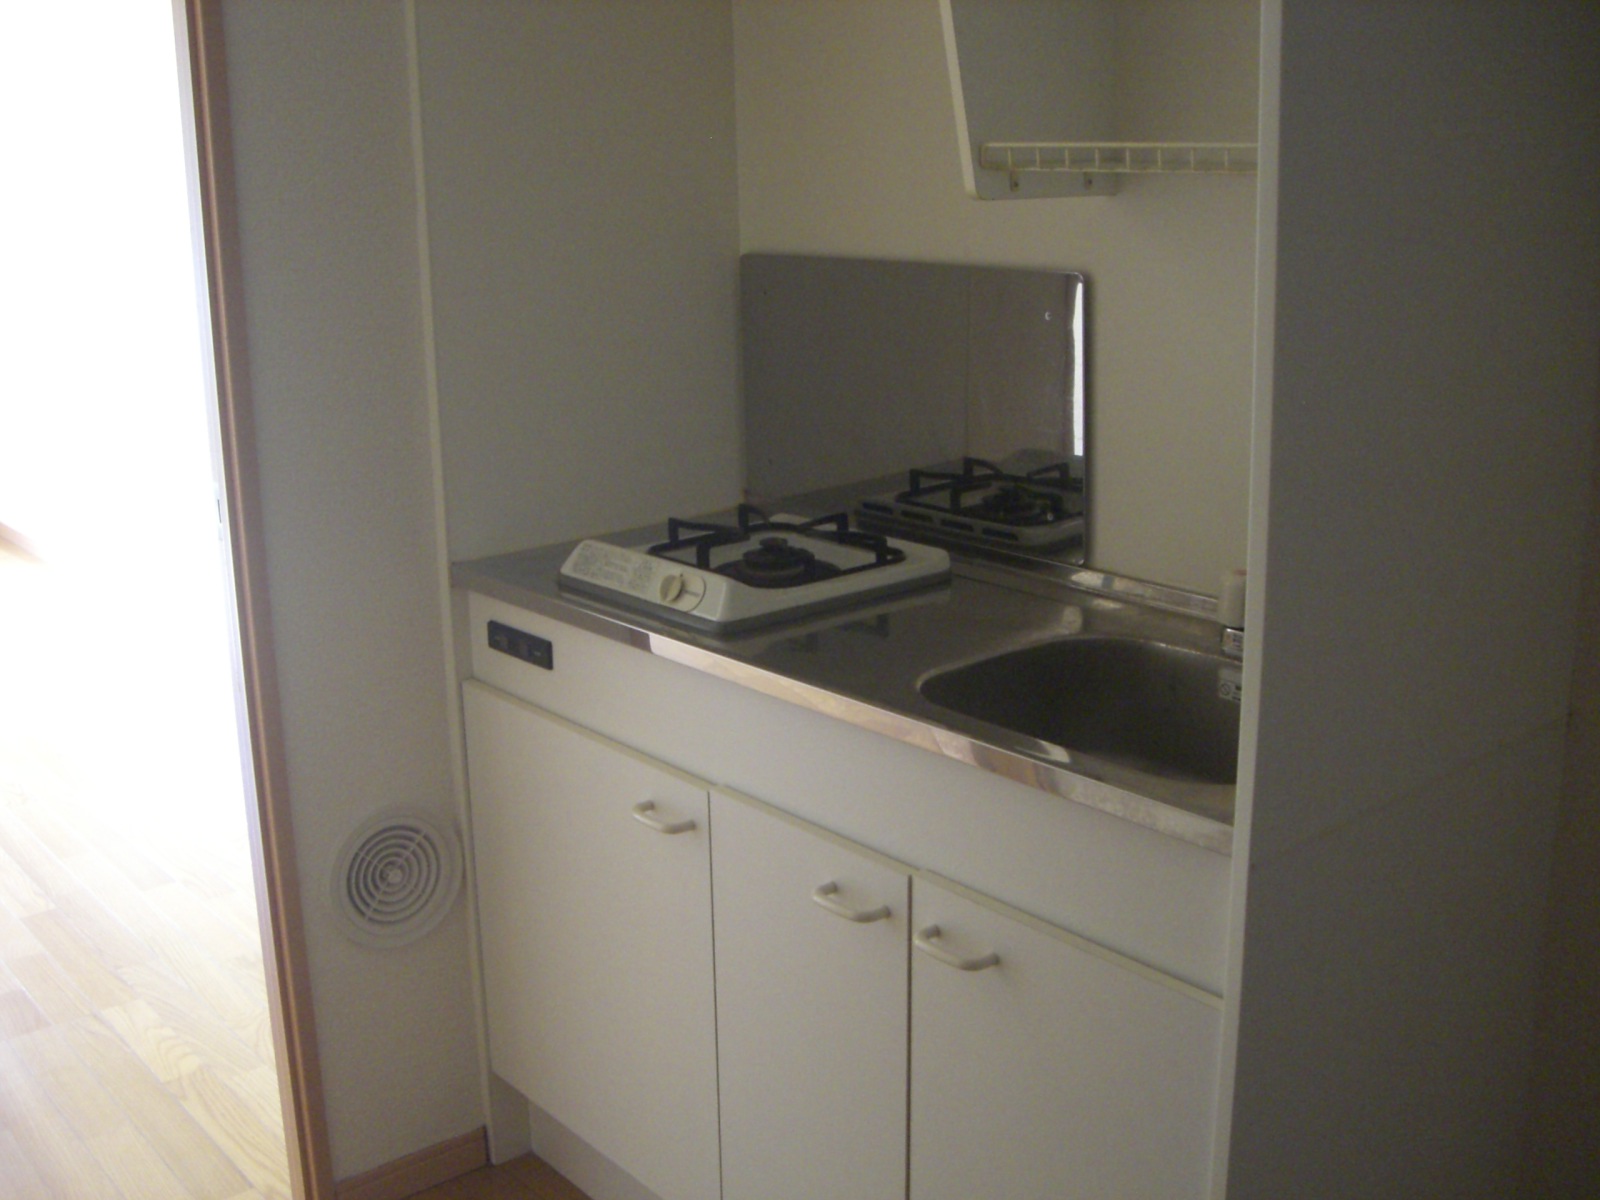 Kitchen. 1-neck With gas stove Photos and the same type